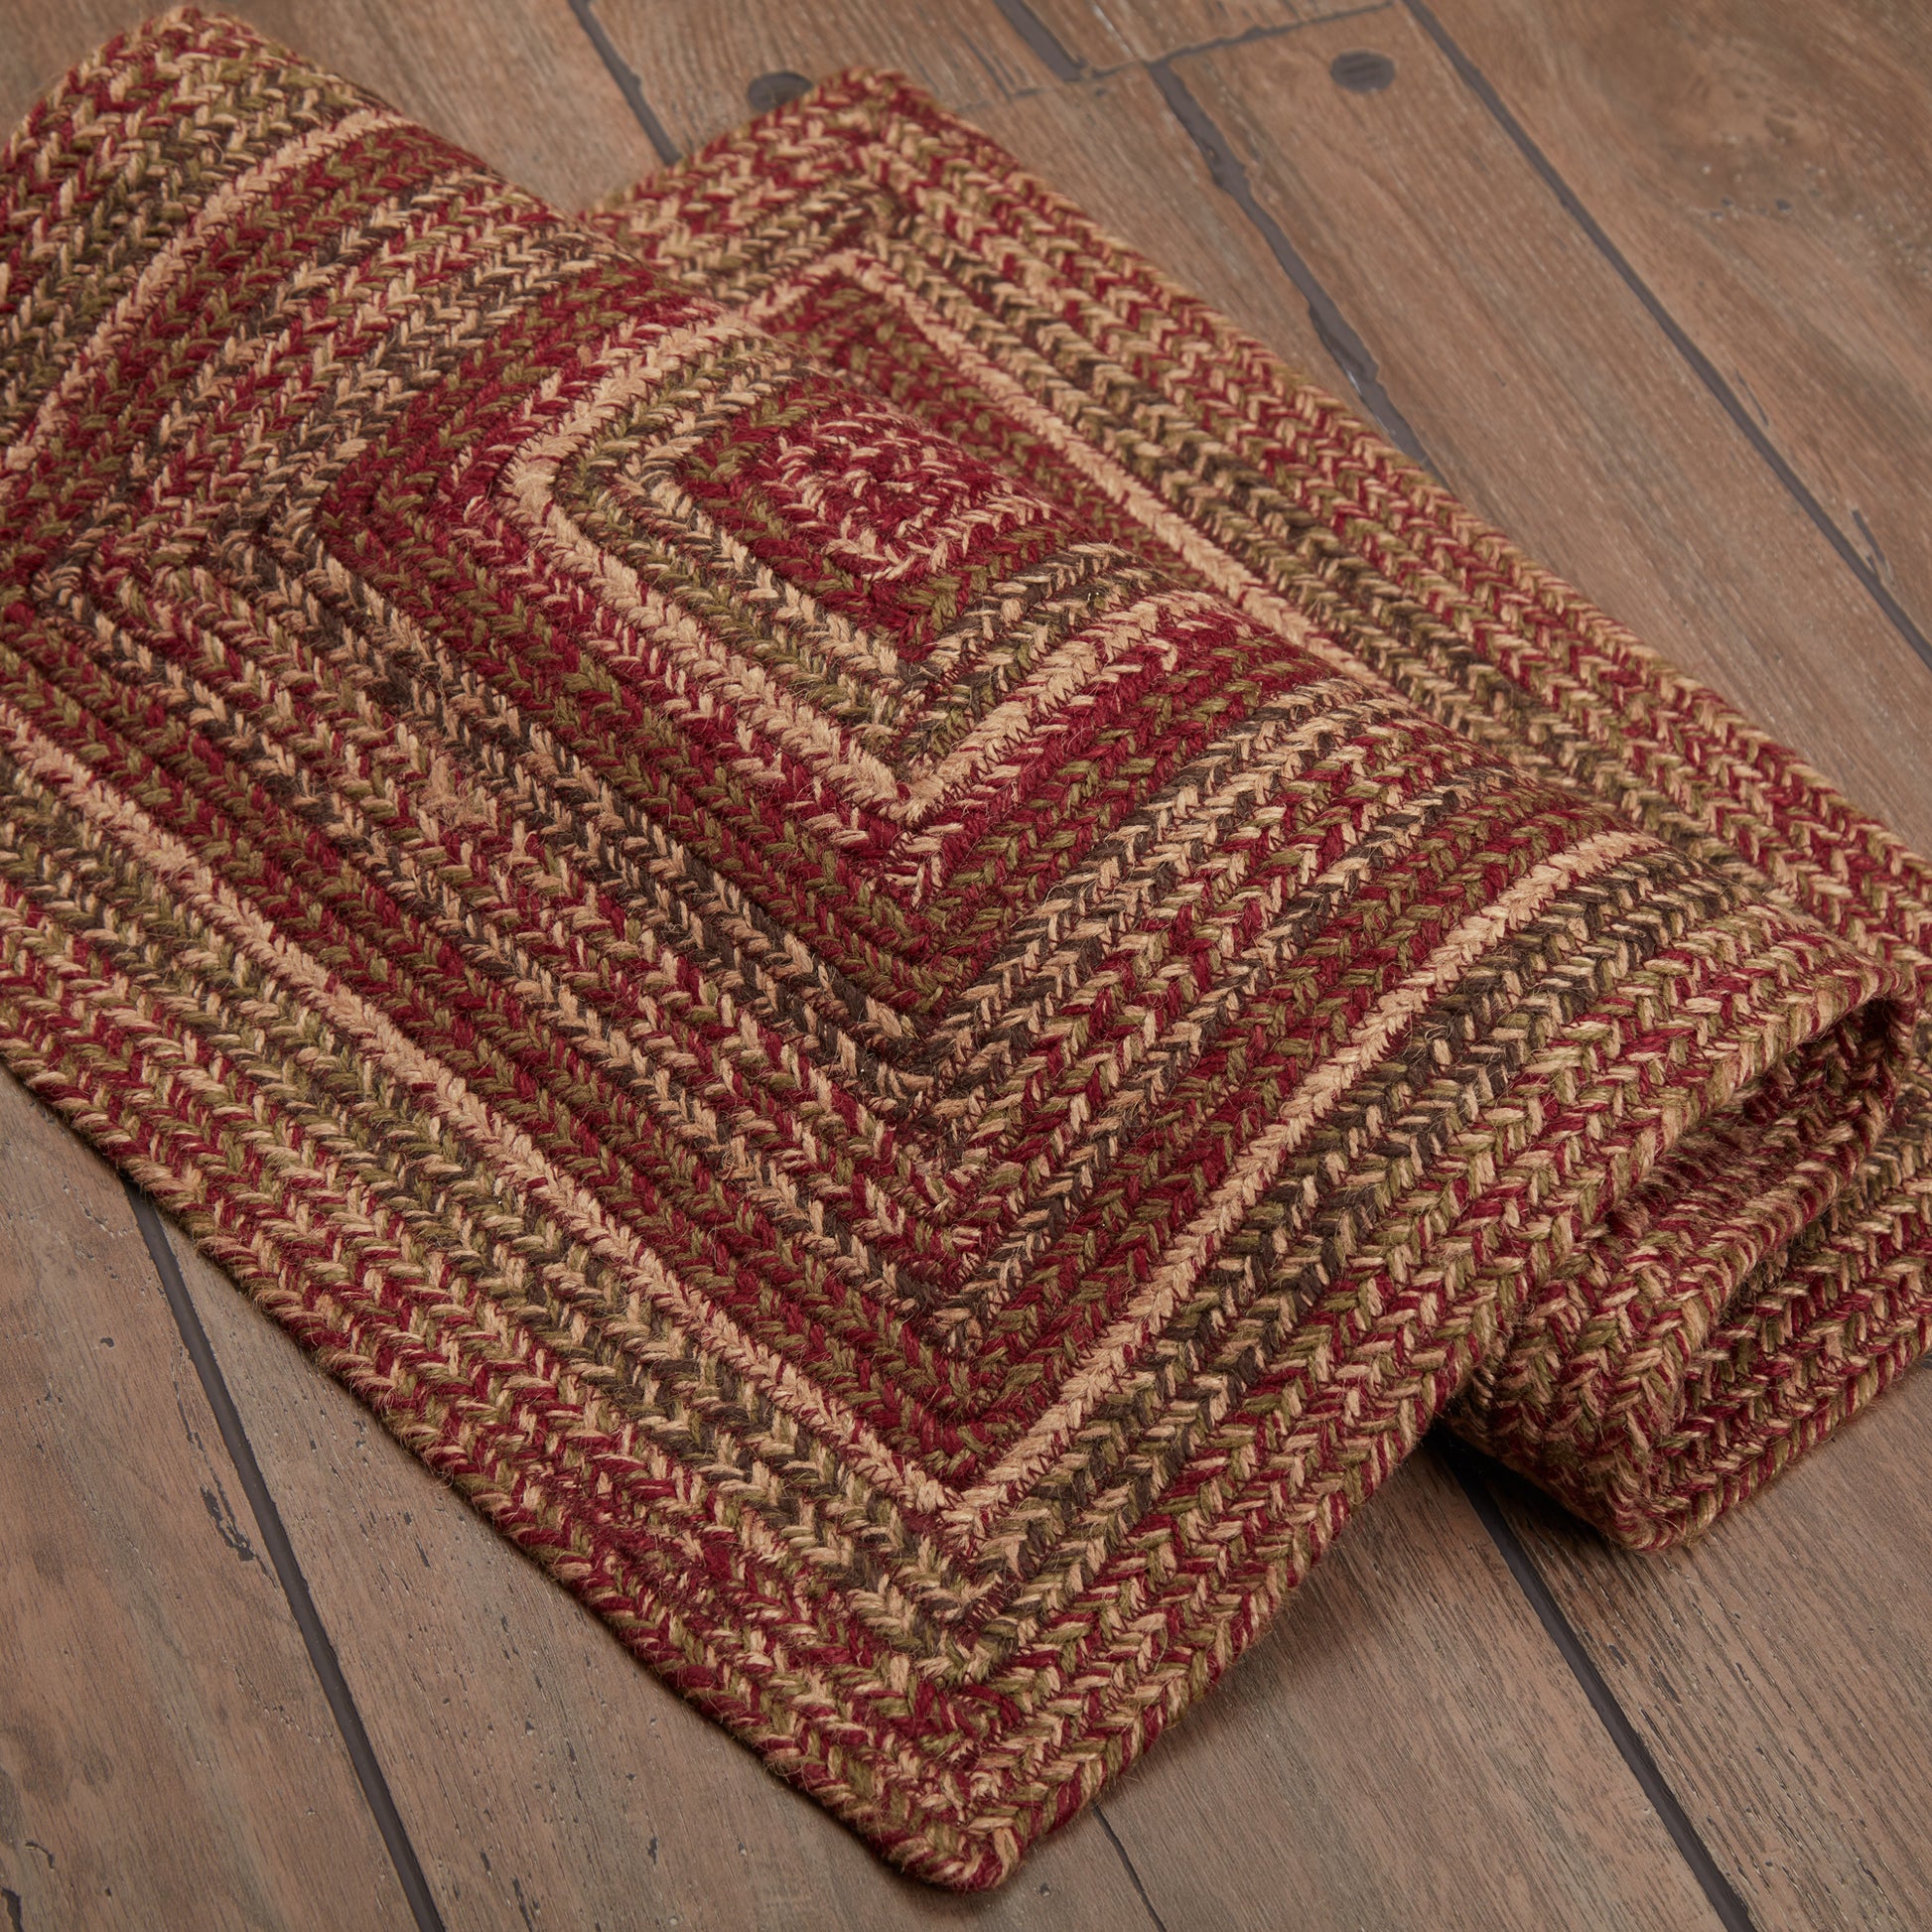 69483-Cider-Mill-Jute-Rug-Rect-w-Pad-20x30-image-10